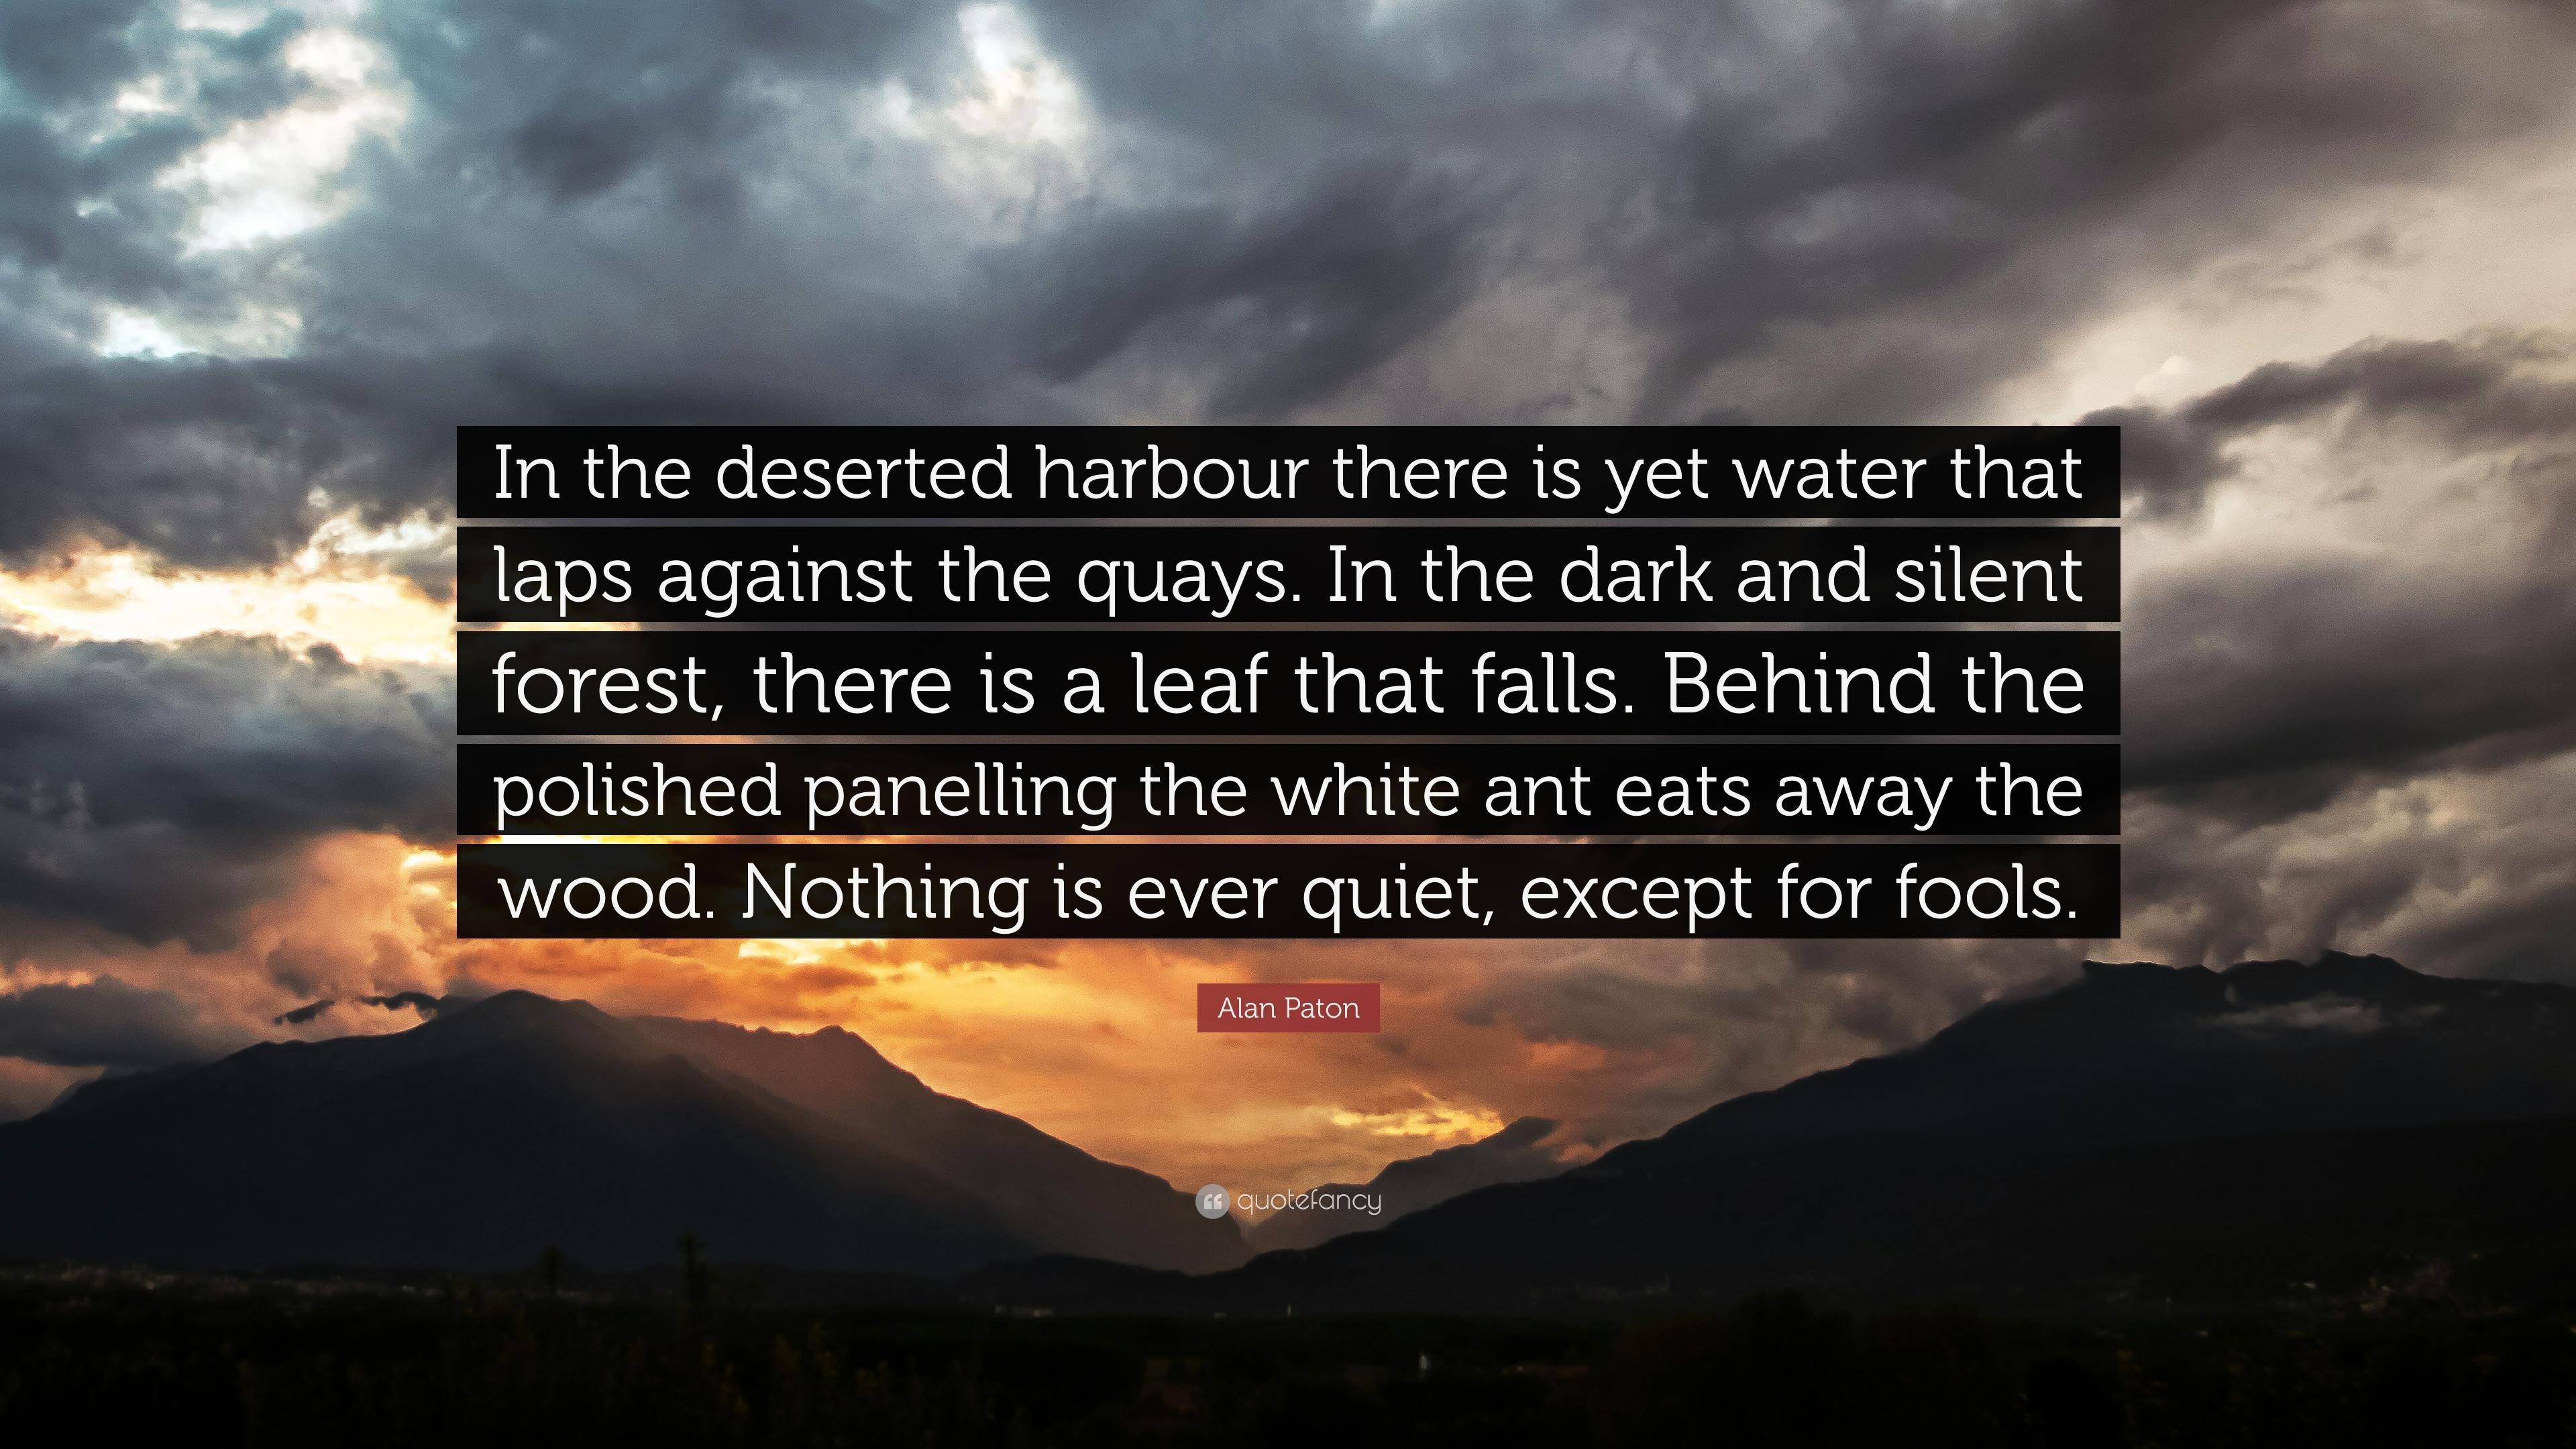 Alan Paton Quote: “In the deserted harbour there is yet water that